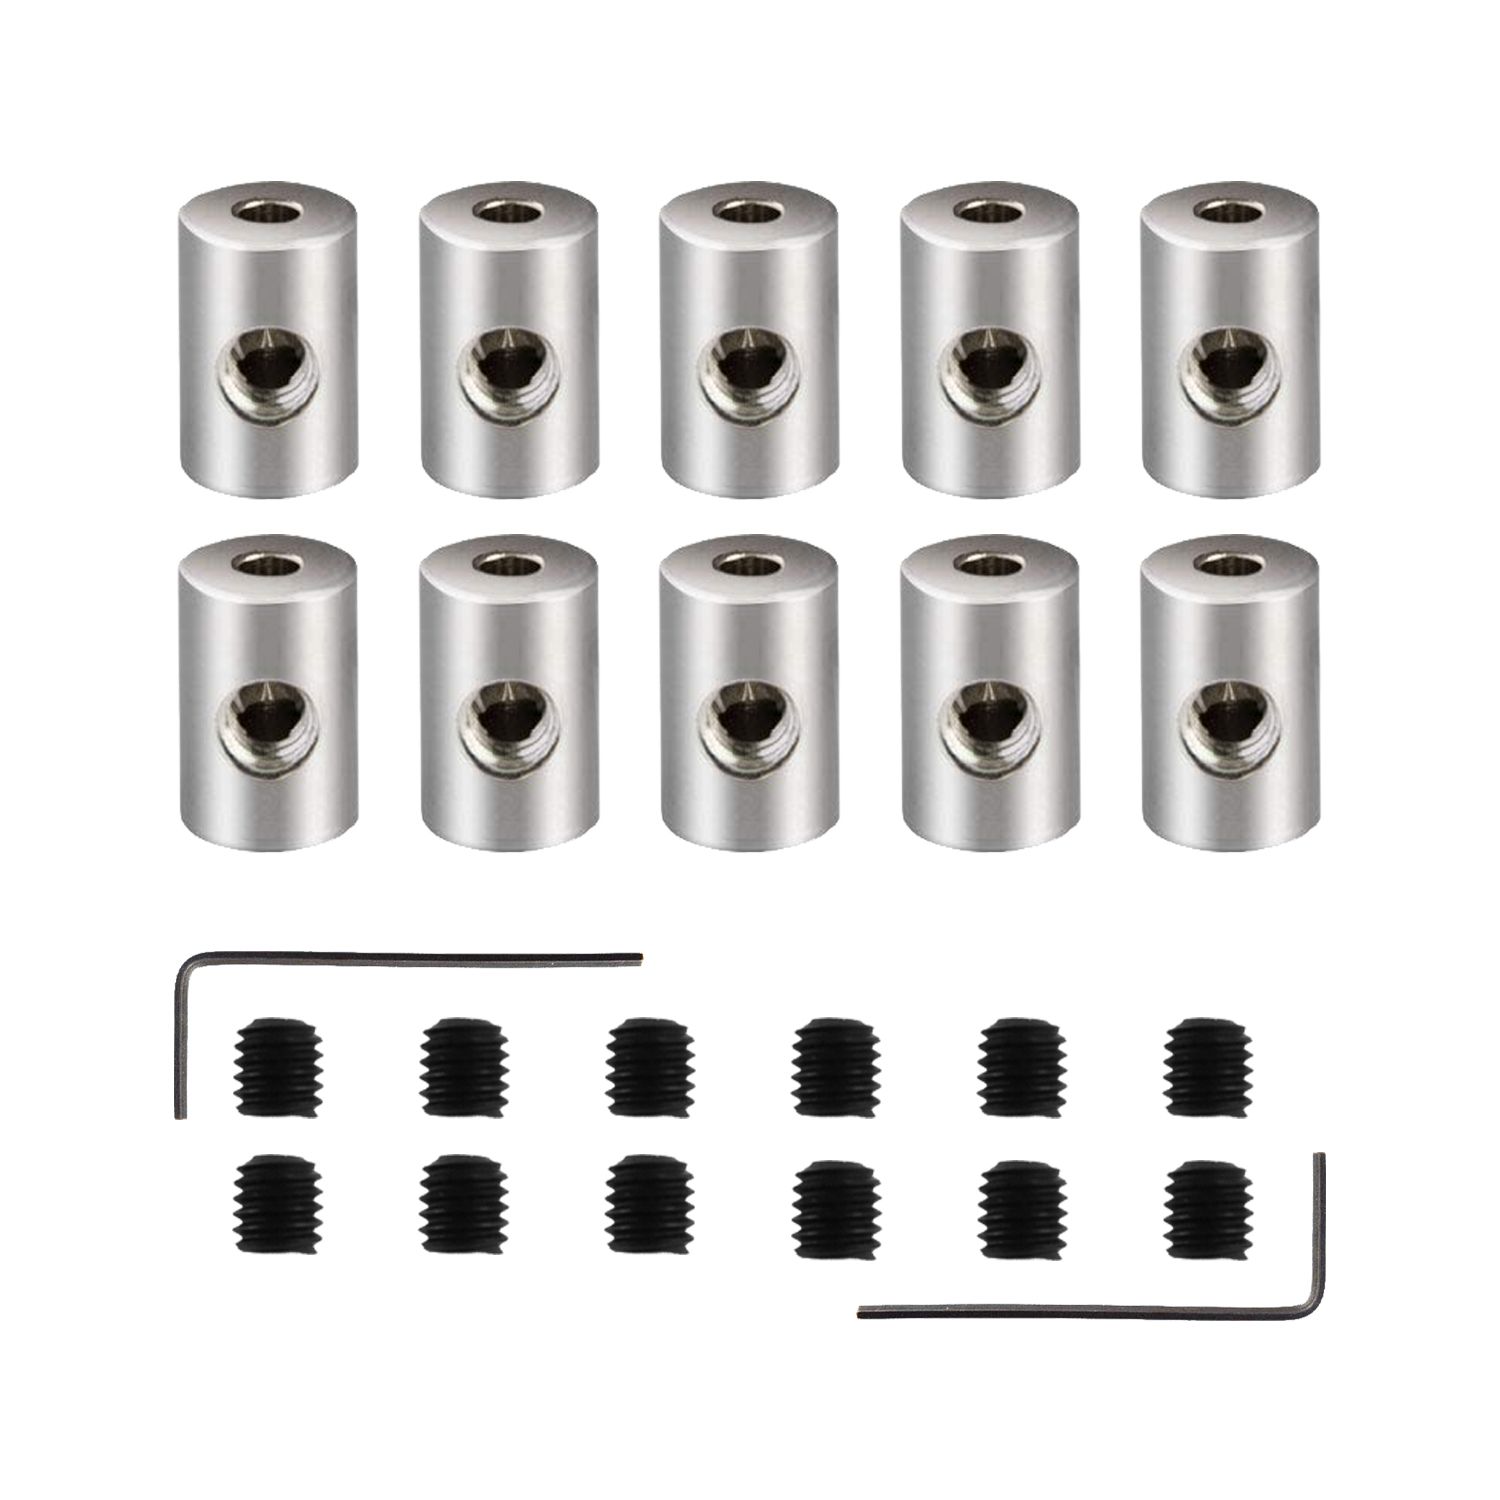 5.5 x 9 mm 60 Pieces Pin Keepers Locking Clasp Pin Backs Replacement with Wrench